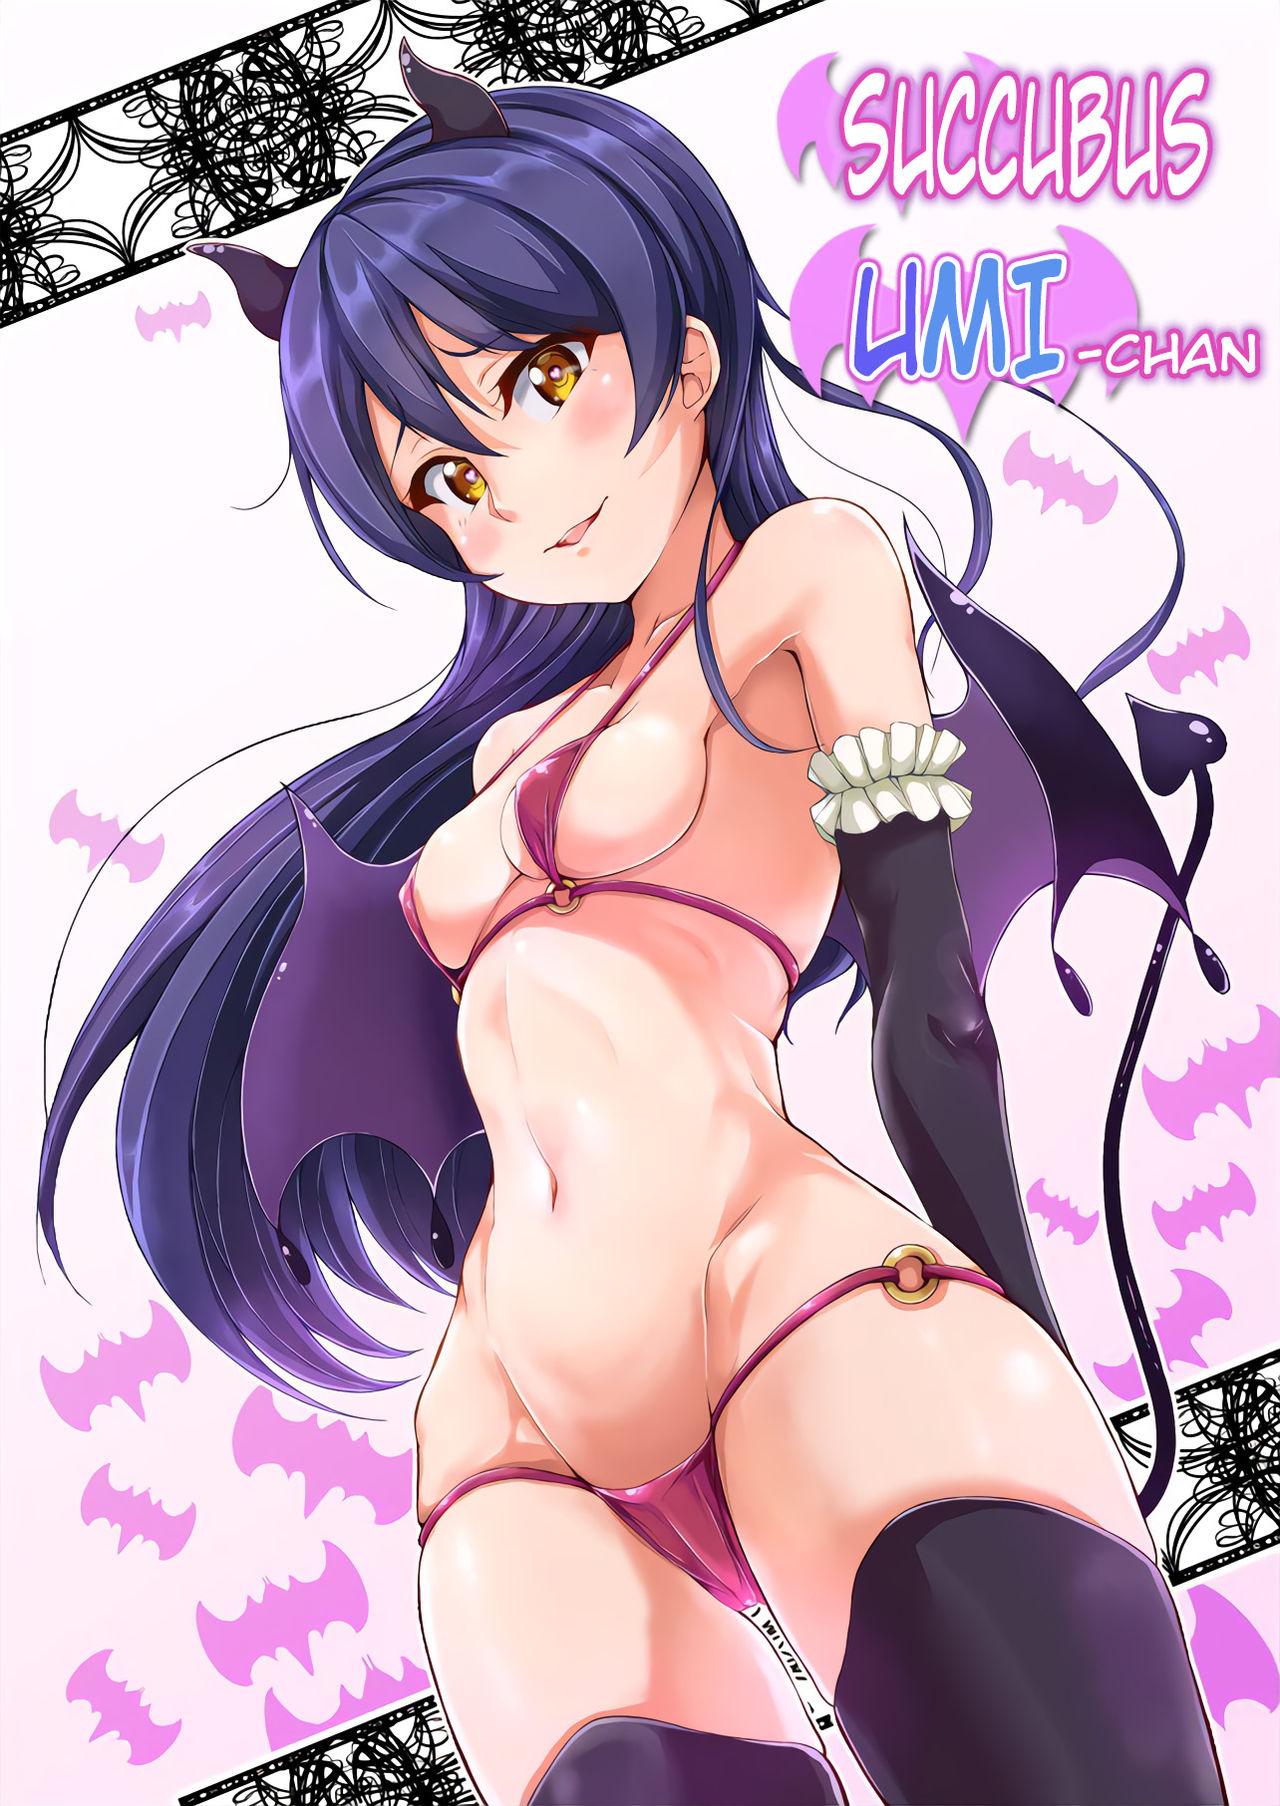 Naked Succubus Umi-chan - Love live One - Picture 1